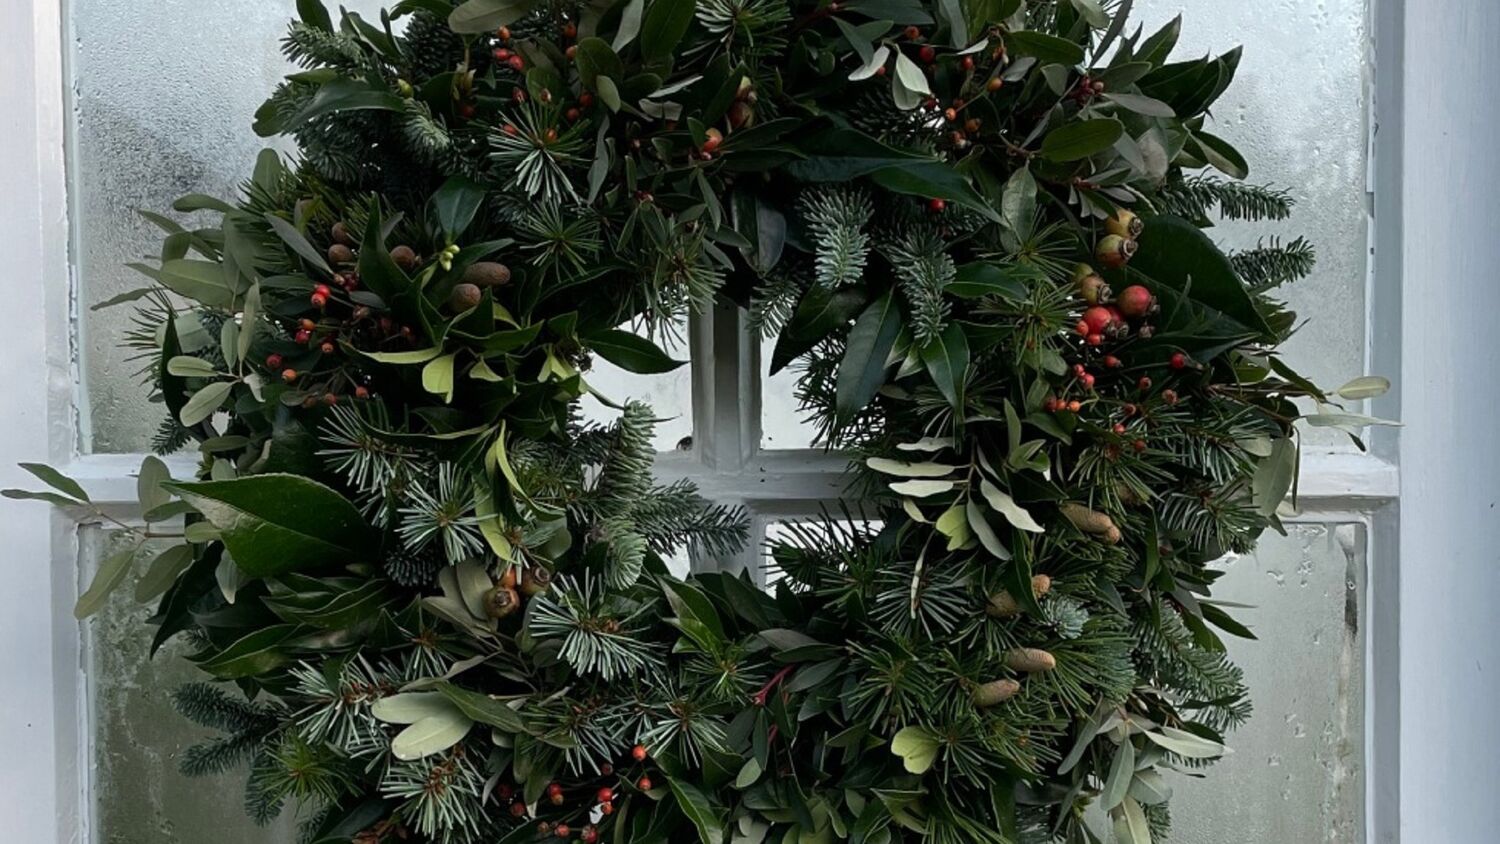 A close-up view of a wreath hanging on a white door with glass panes. The wreath is made mostly from evergreen foliage, as well as some cones and berries.